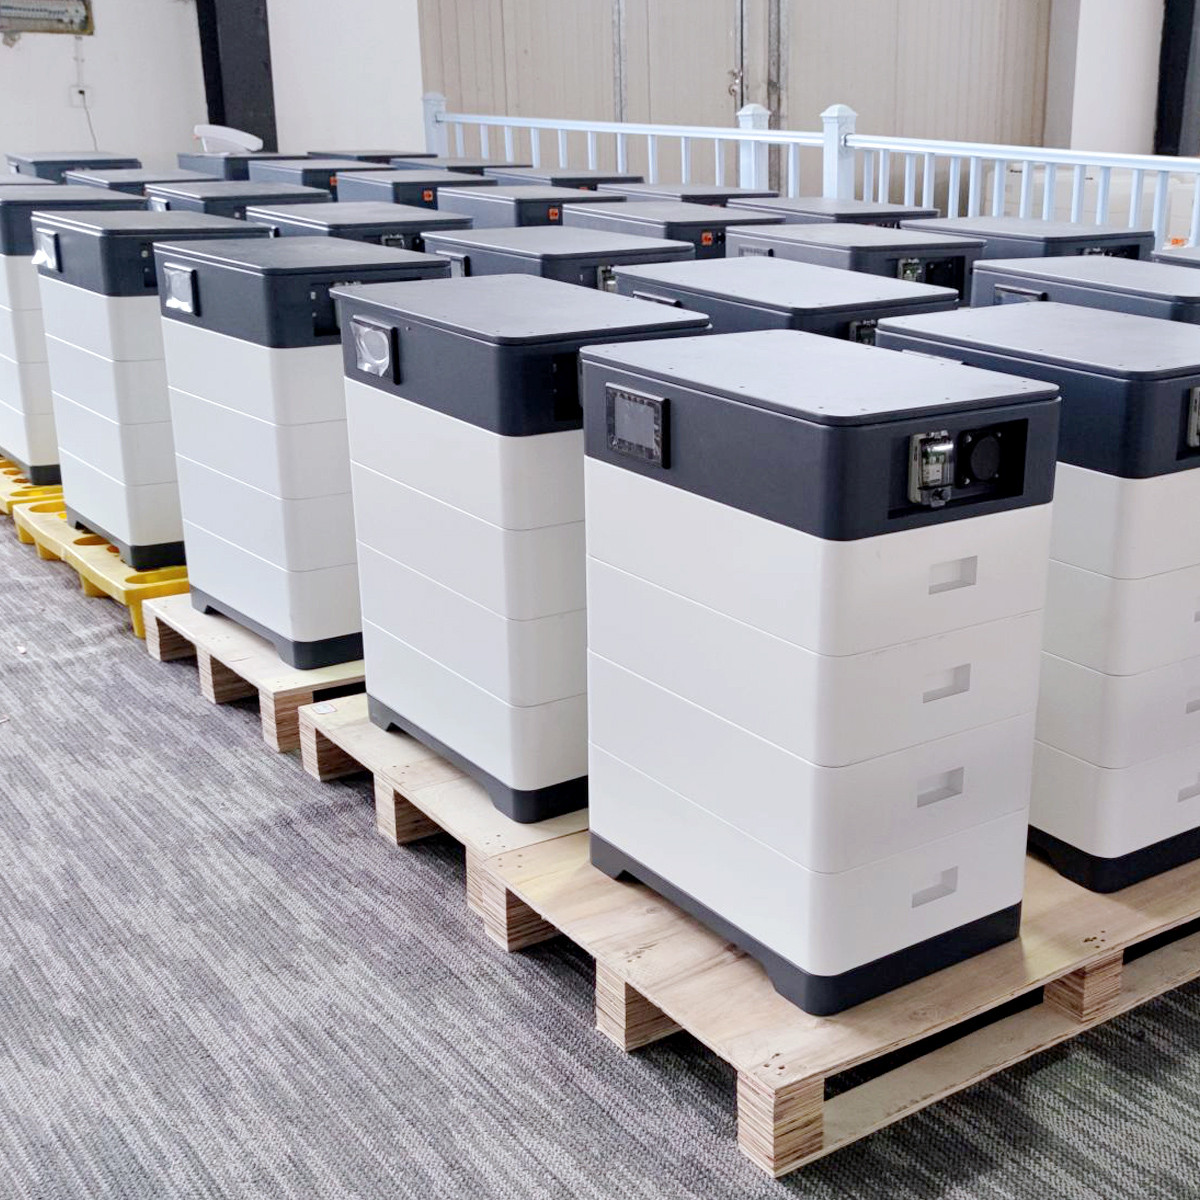 U.S. battery storage capacity will increase significantly by 2025